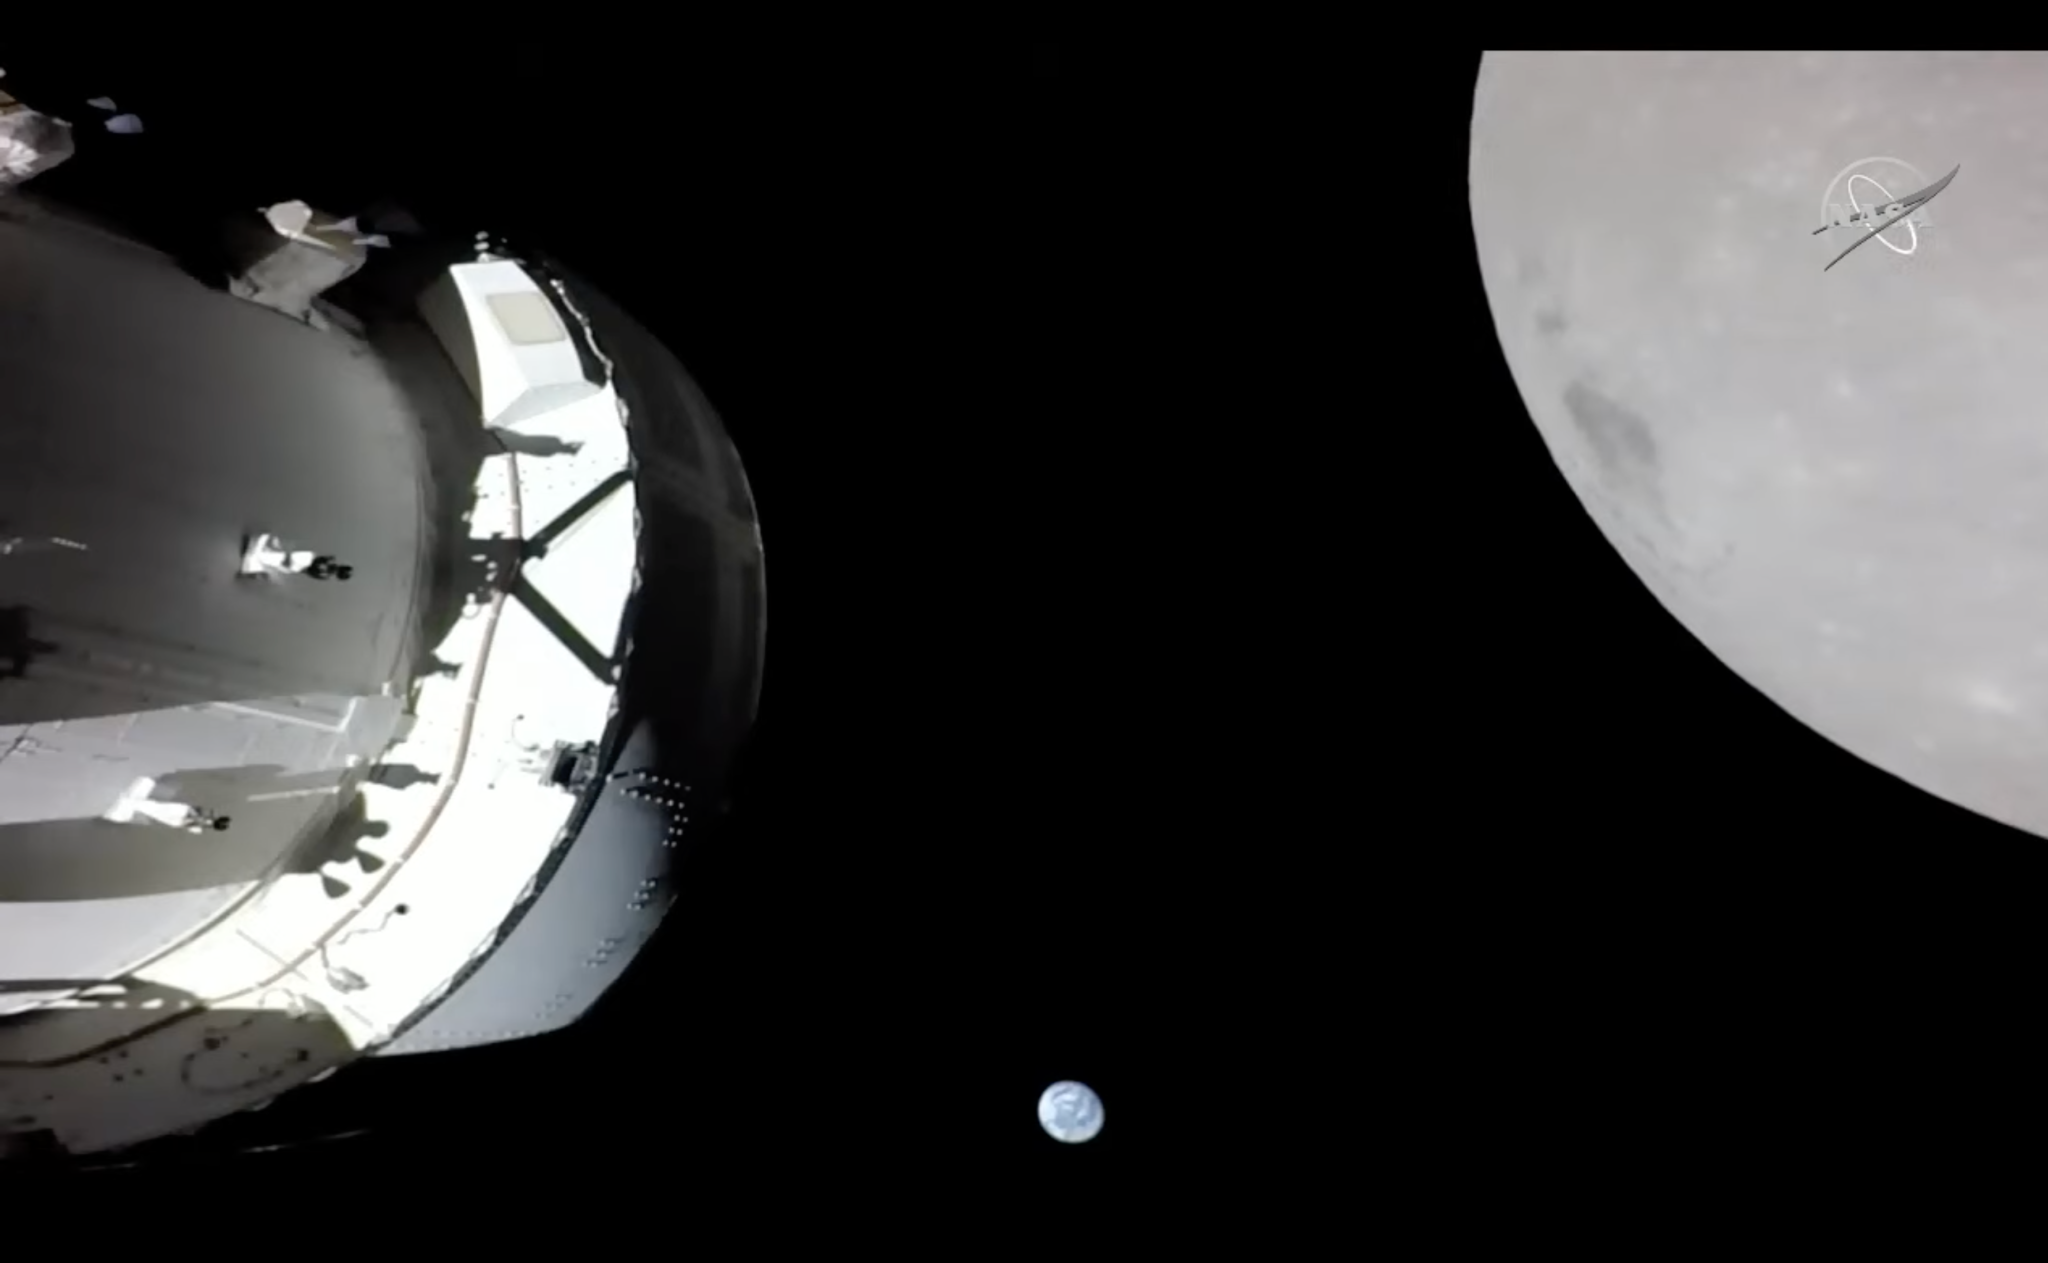 On Nov. 21, 2022, a camera on the Orion's solar array wing camera captured this view of the spacecraft, the Earth and the Moon.